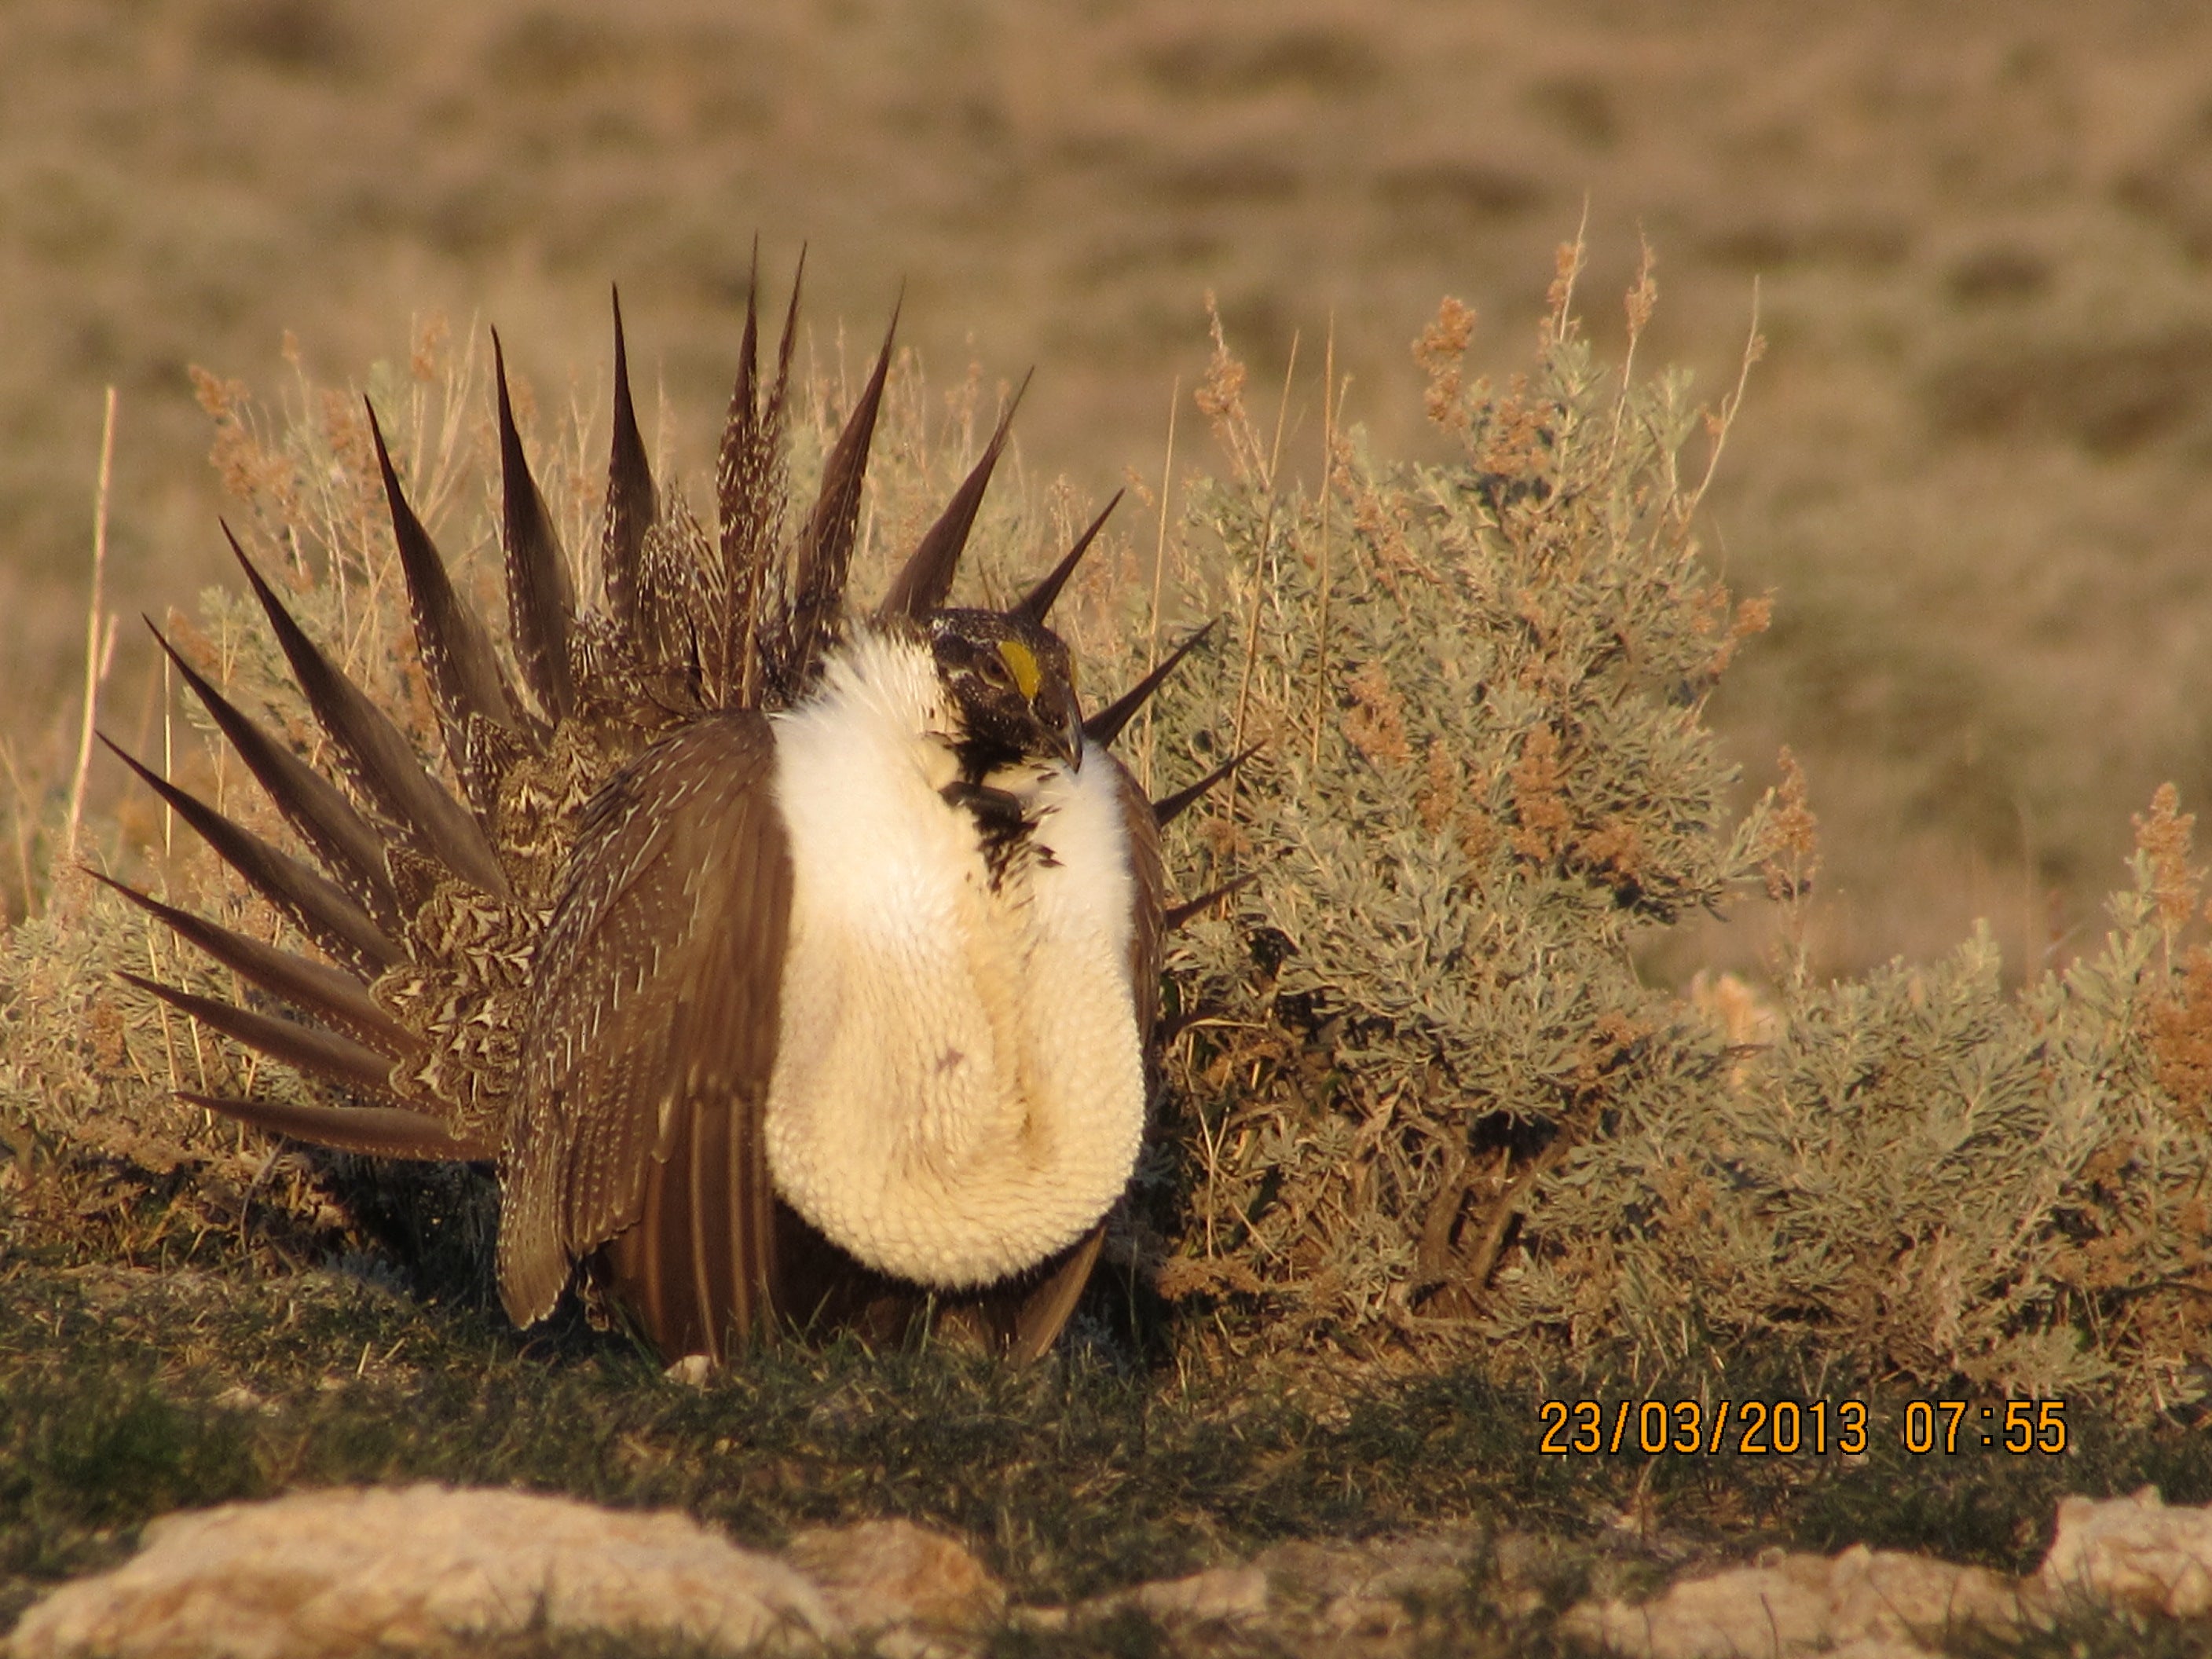 sage-grouse with puffed up feathers